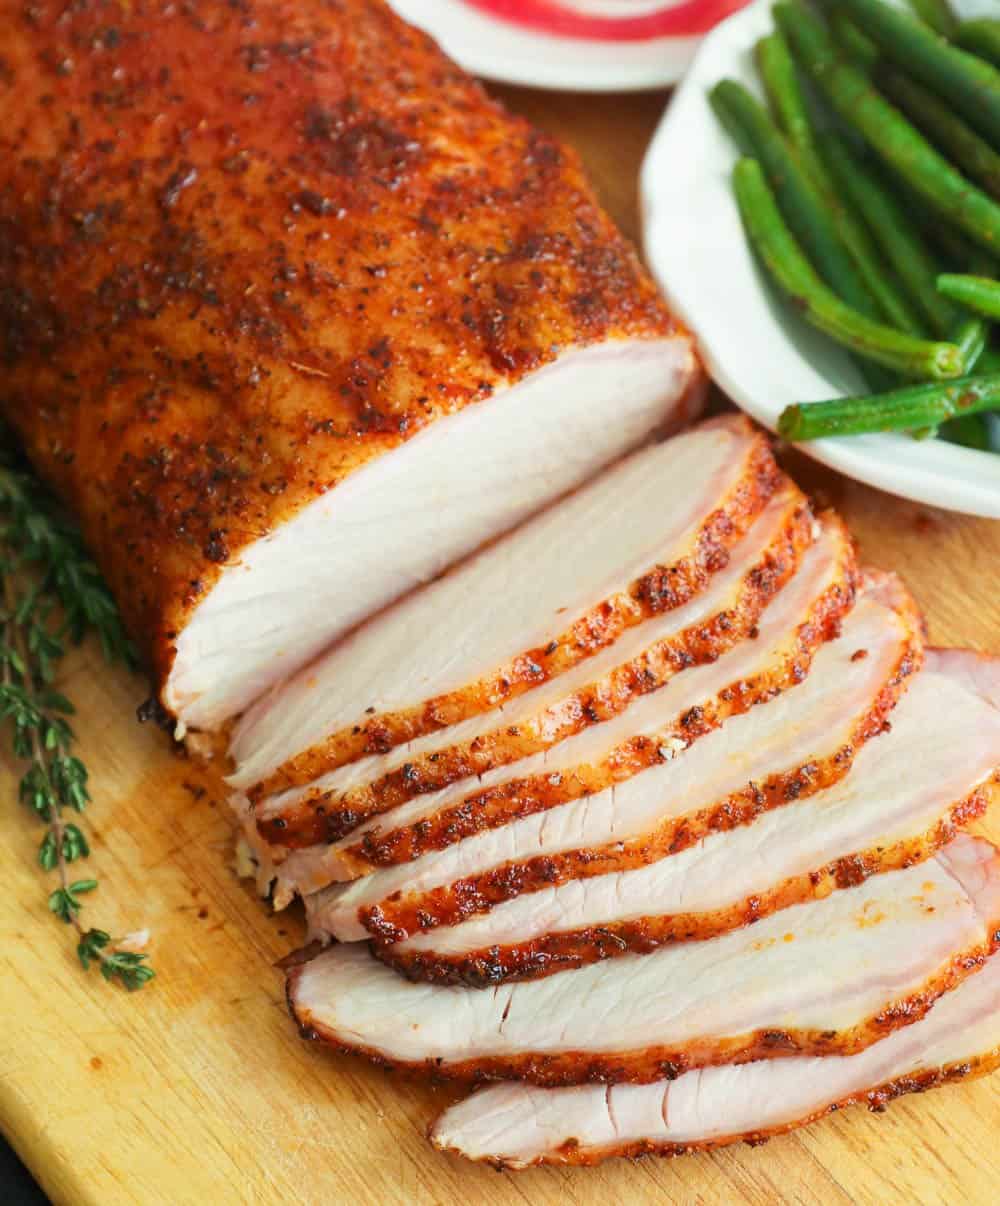 Smoked pork loin close-up with green beans and tomatoes